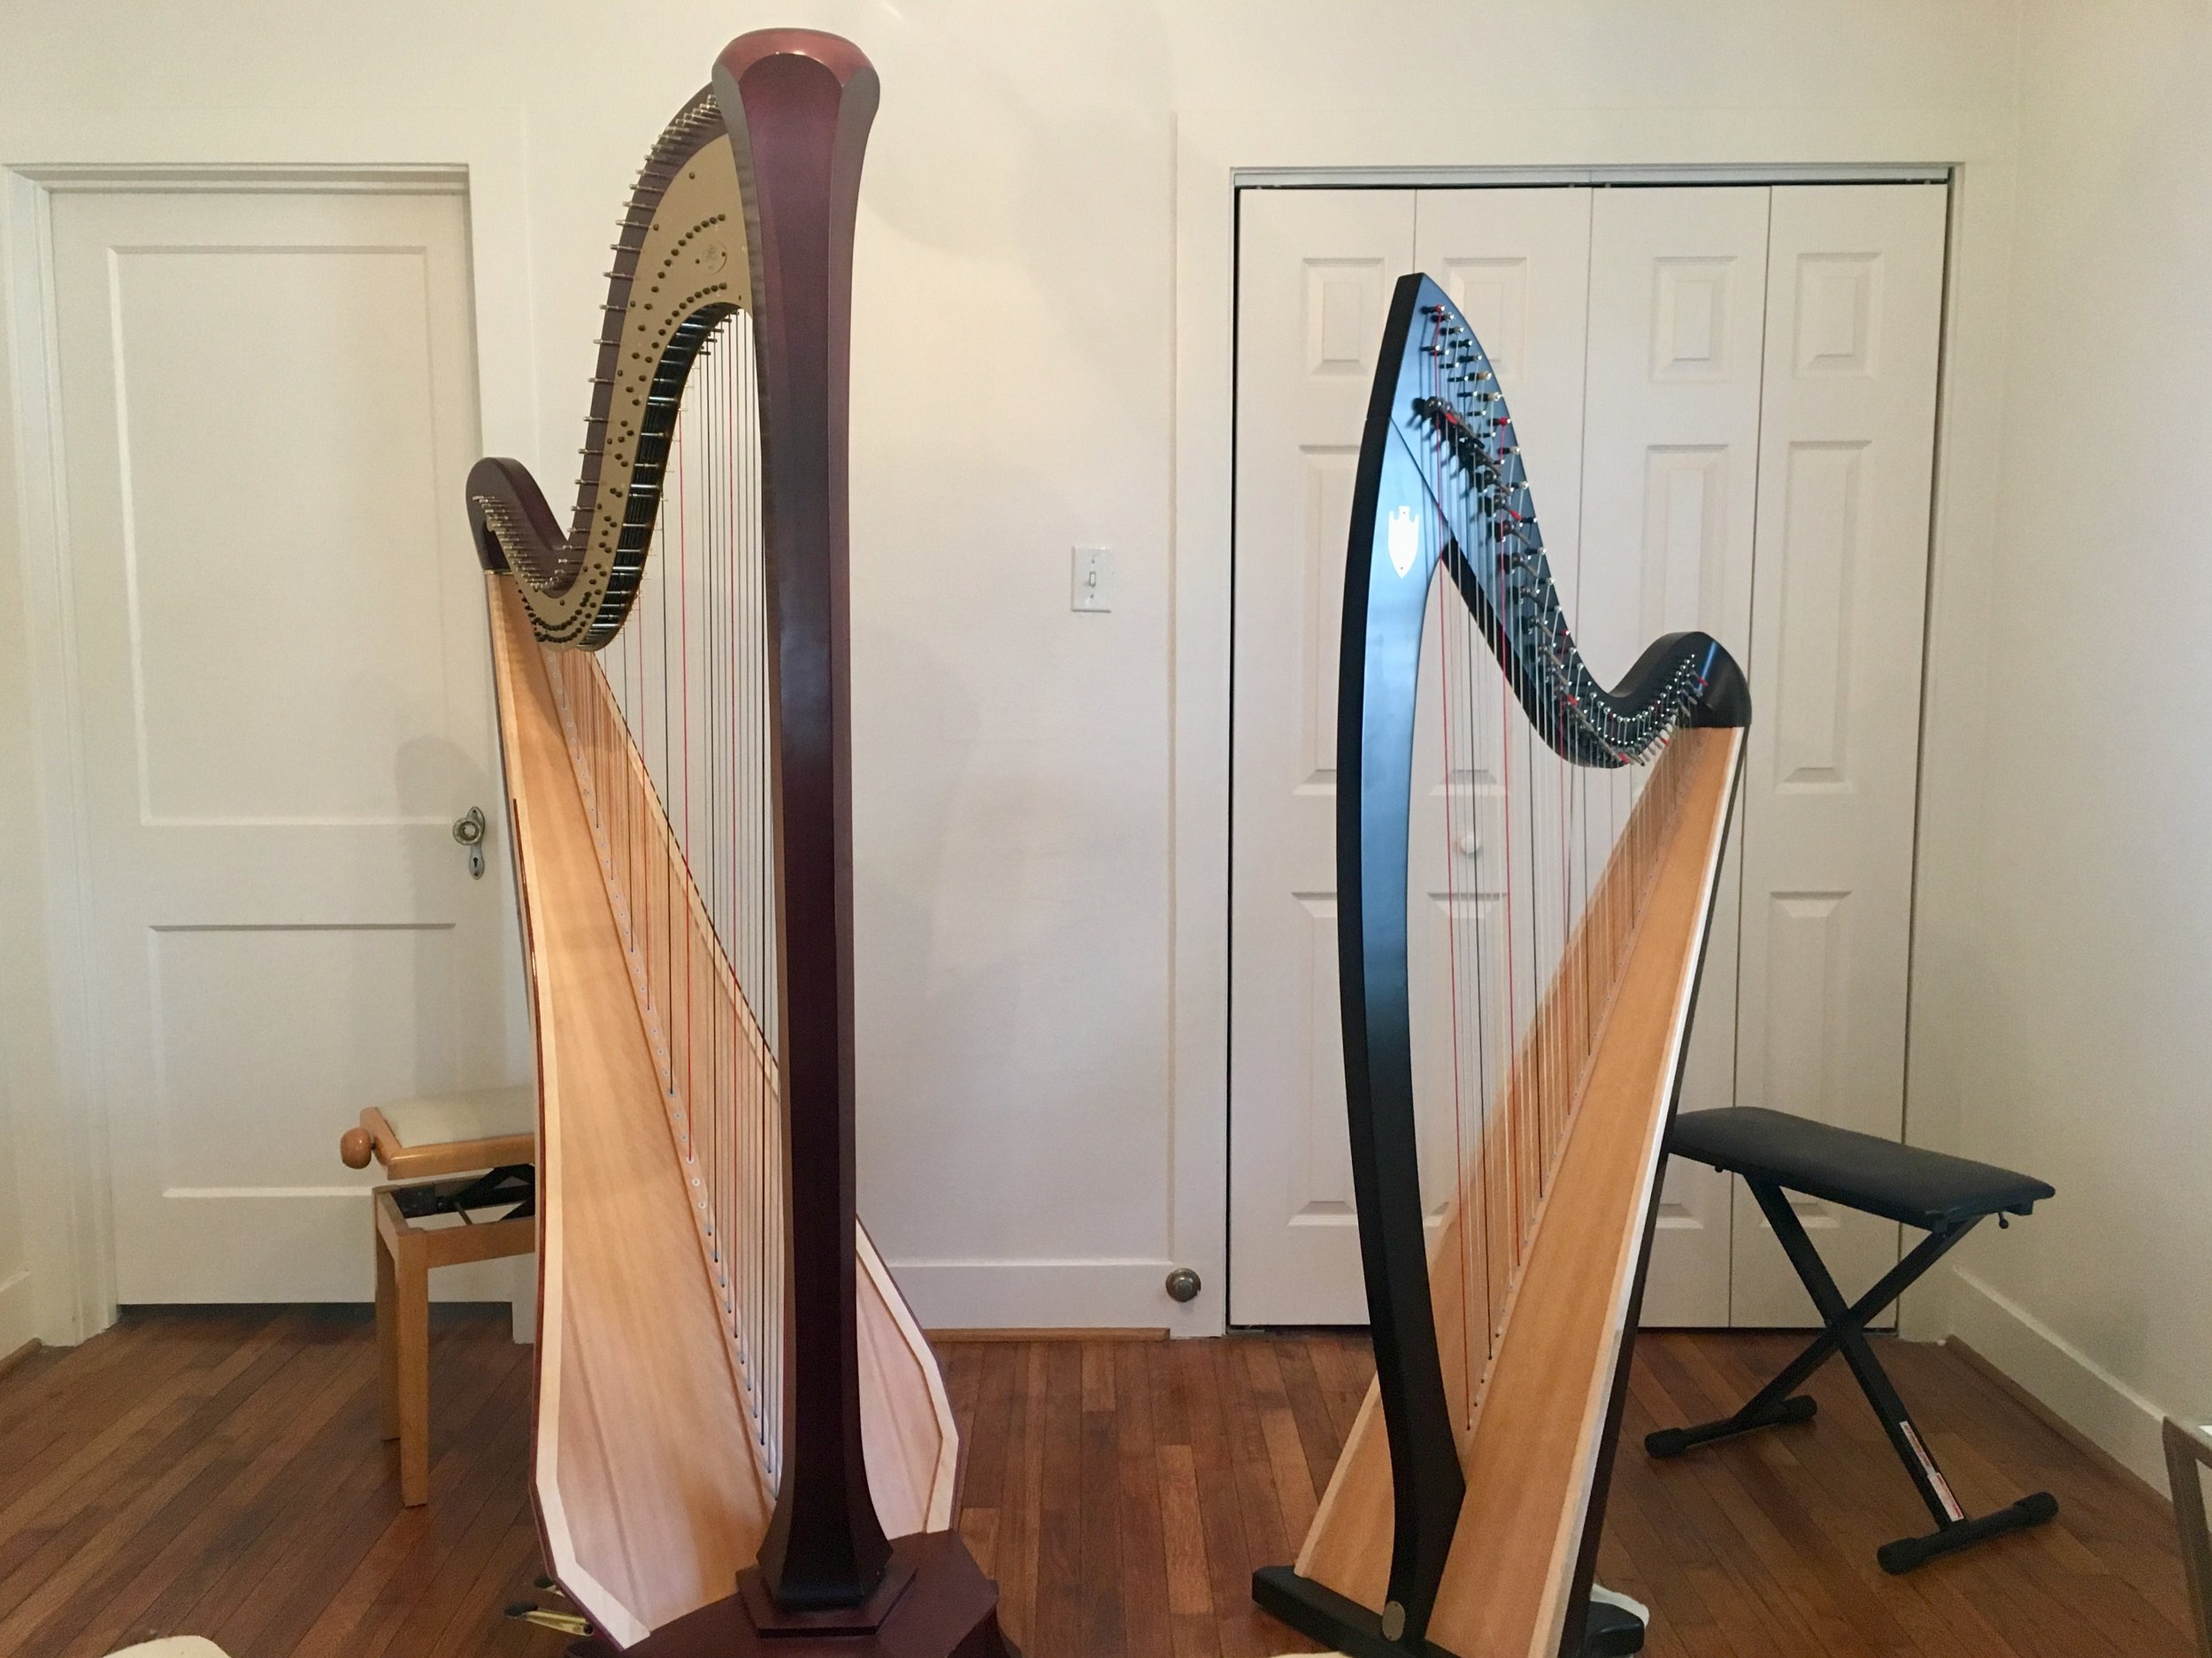  Stephanie's studio space allows for lessons on a Lyon &amp; Healy concert grand pedal harp or Troubadour lever harp. 